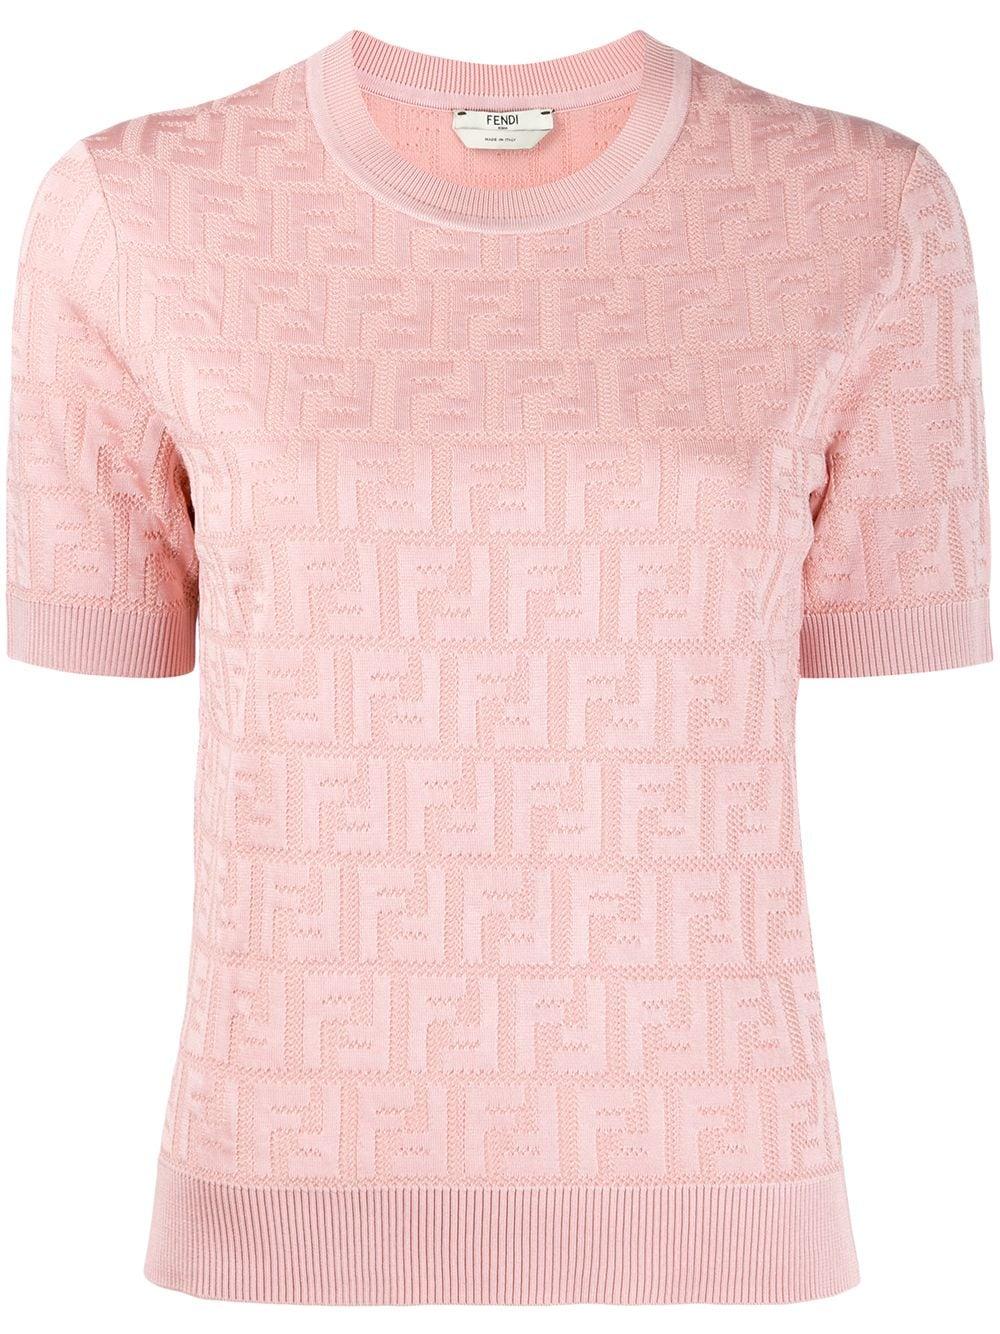 Fendi Cotton Ff Motif Knitted Top in Pink - Save 10% - Lyst